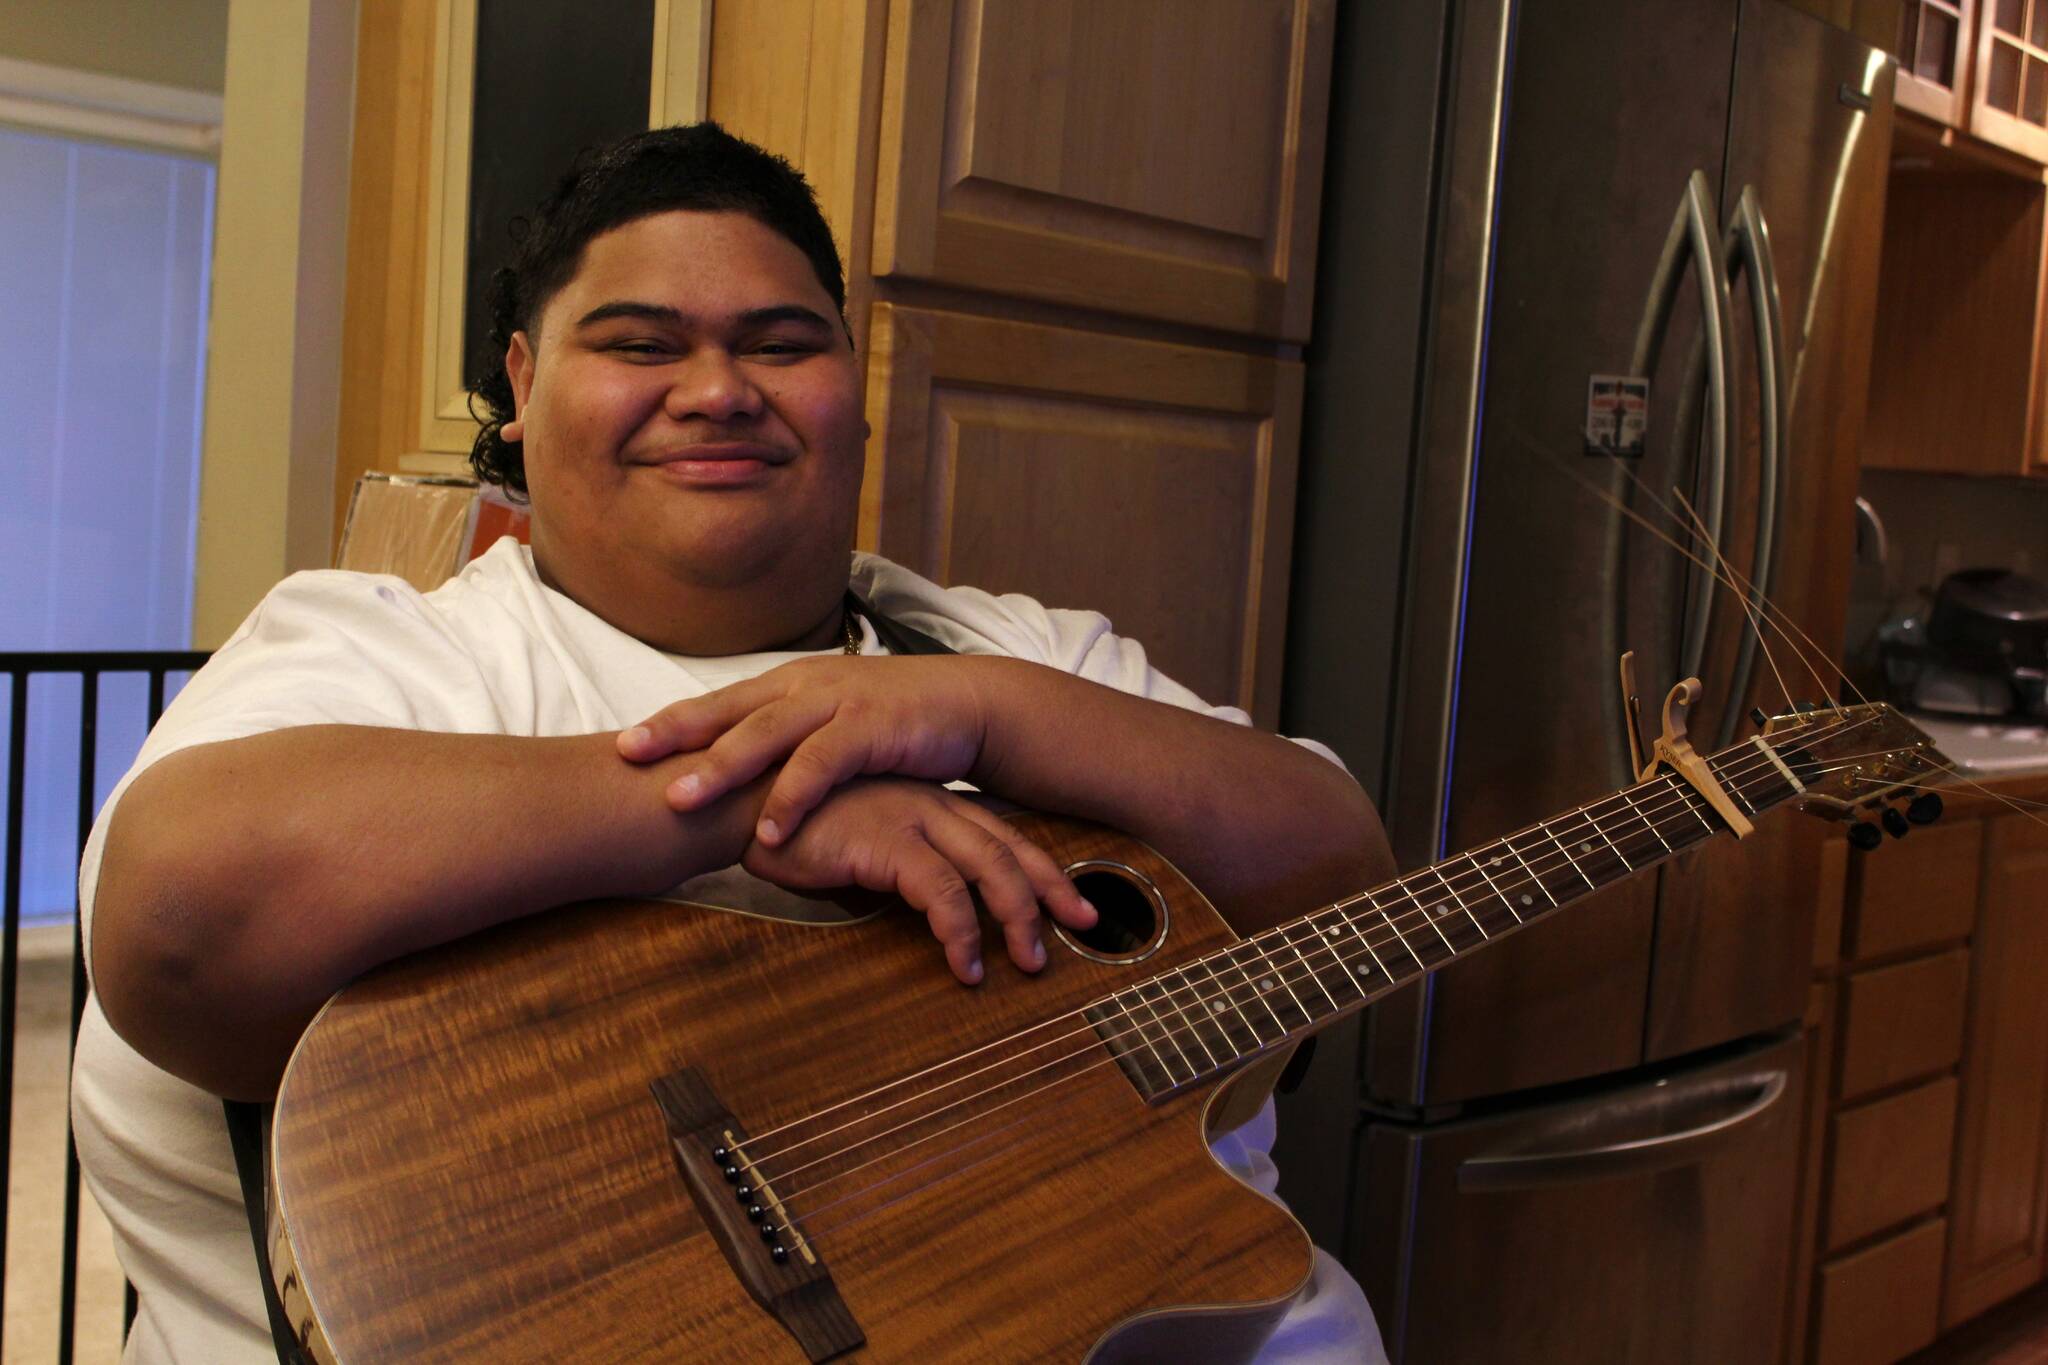 Alex Bruell / The Mirror
Decatur High School senior and “American Idol” contestant Iam Tongi sits at home on March 1. His father Rodney spent a bonus from his job as an electrician to buy Iam’s guitar.